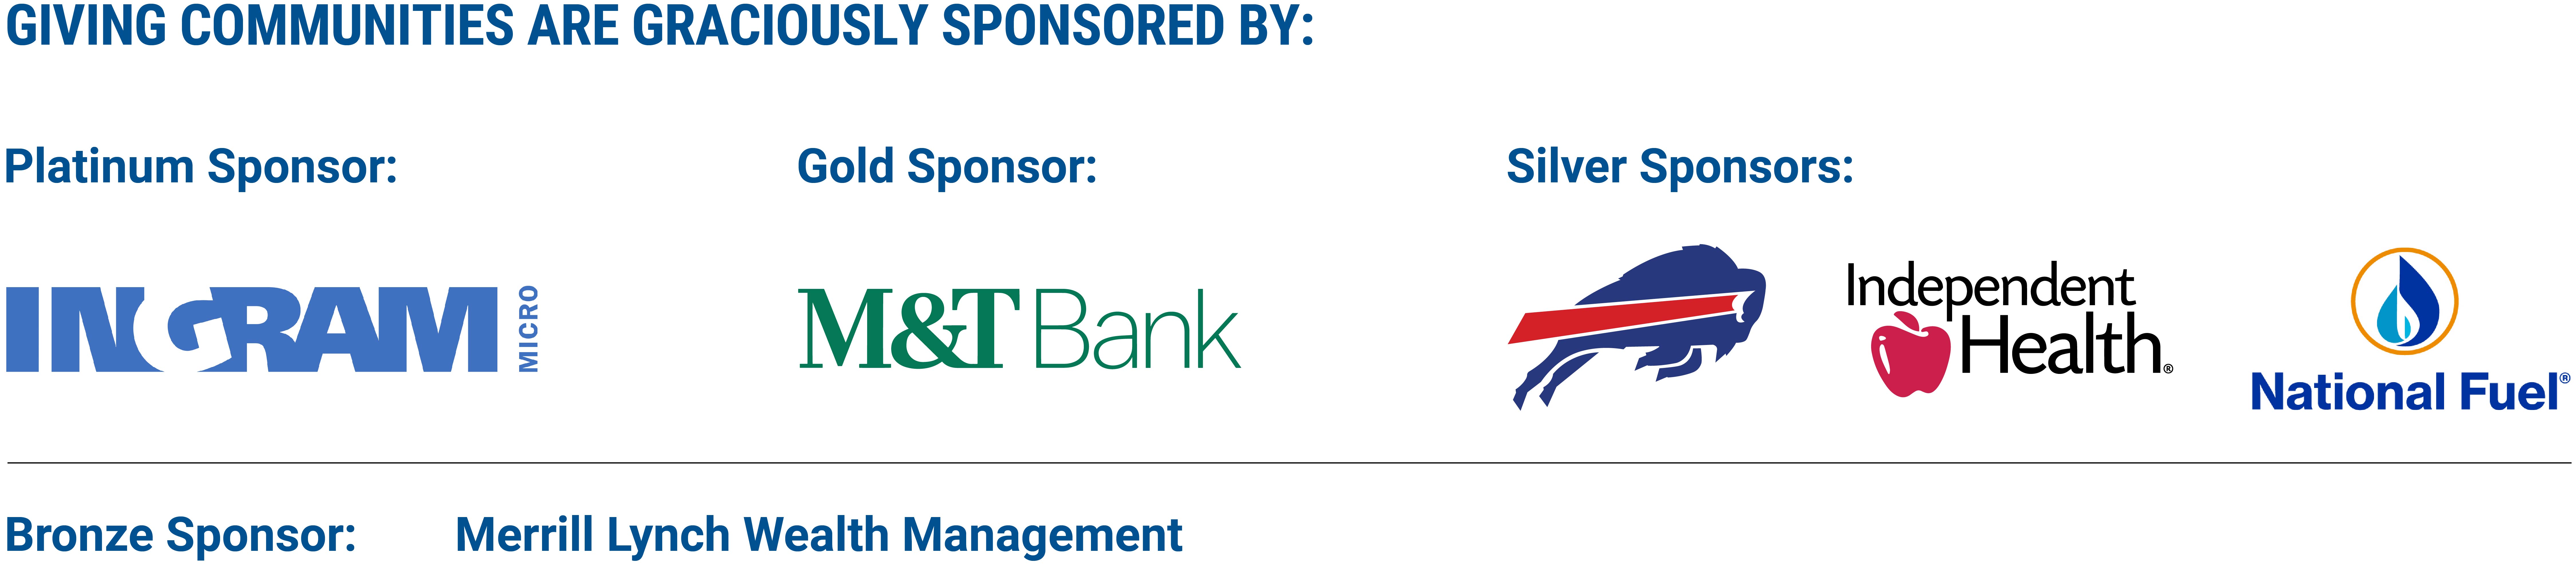 These are the Sponsors for the giving communities. Ingram, M&T Bank, Buffalo Bills, Independent Health, National Fuel 